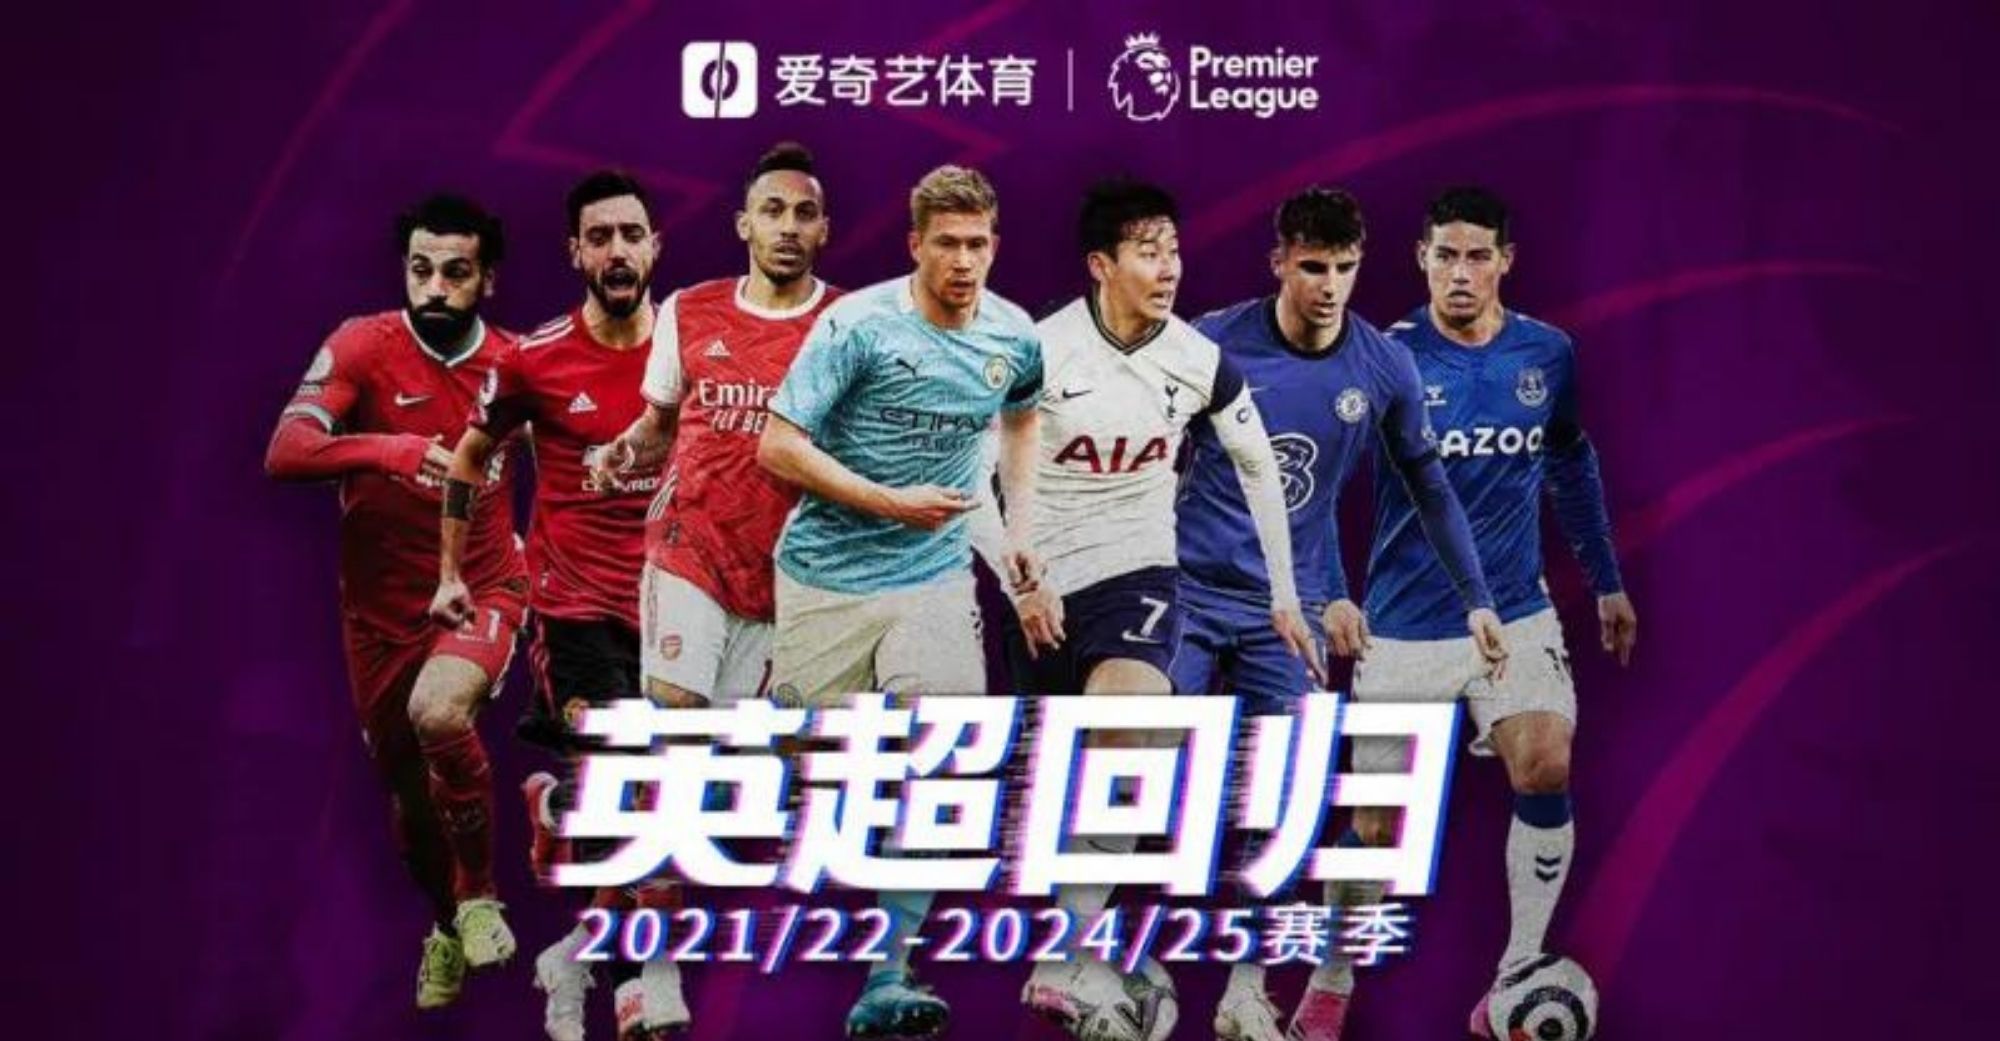 Chinese Streaming Platform iQiyi Signs 4-Year Deal with English Premier League